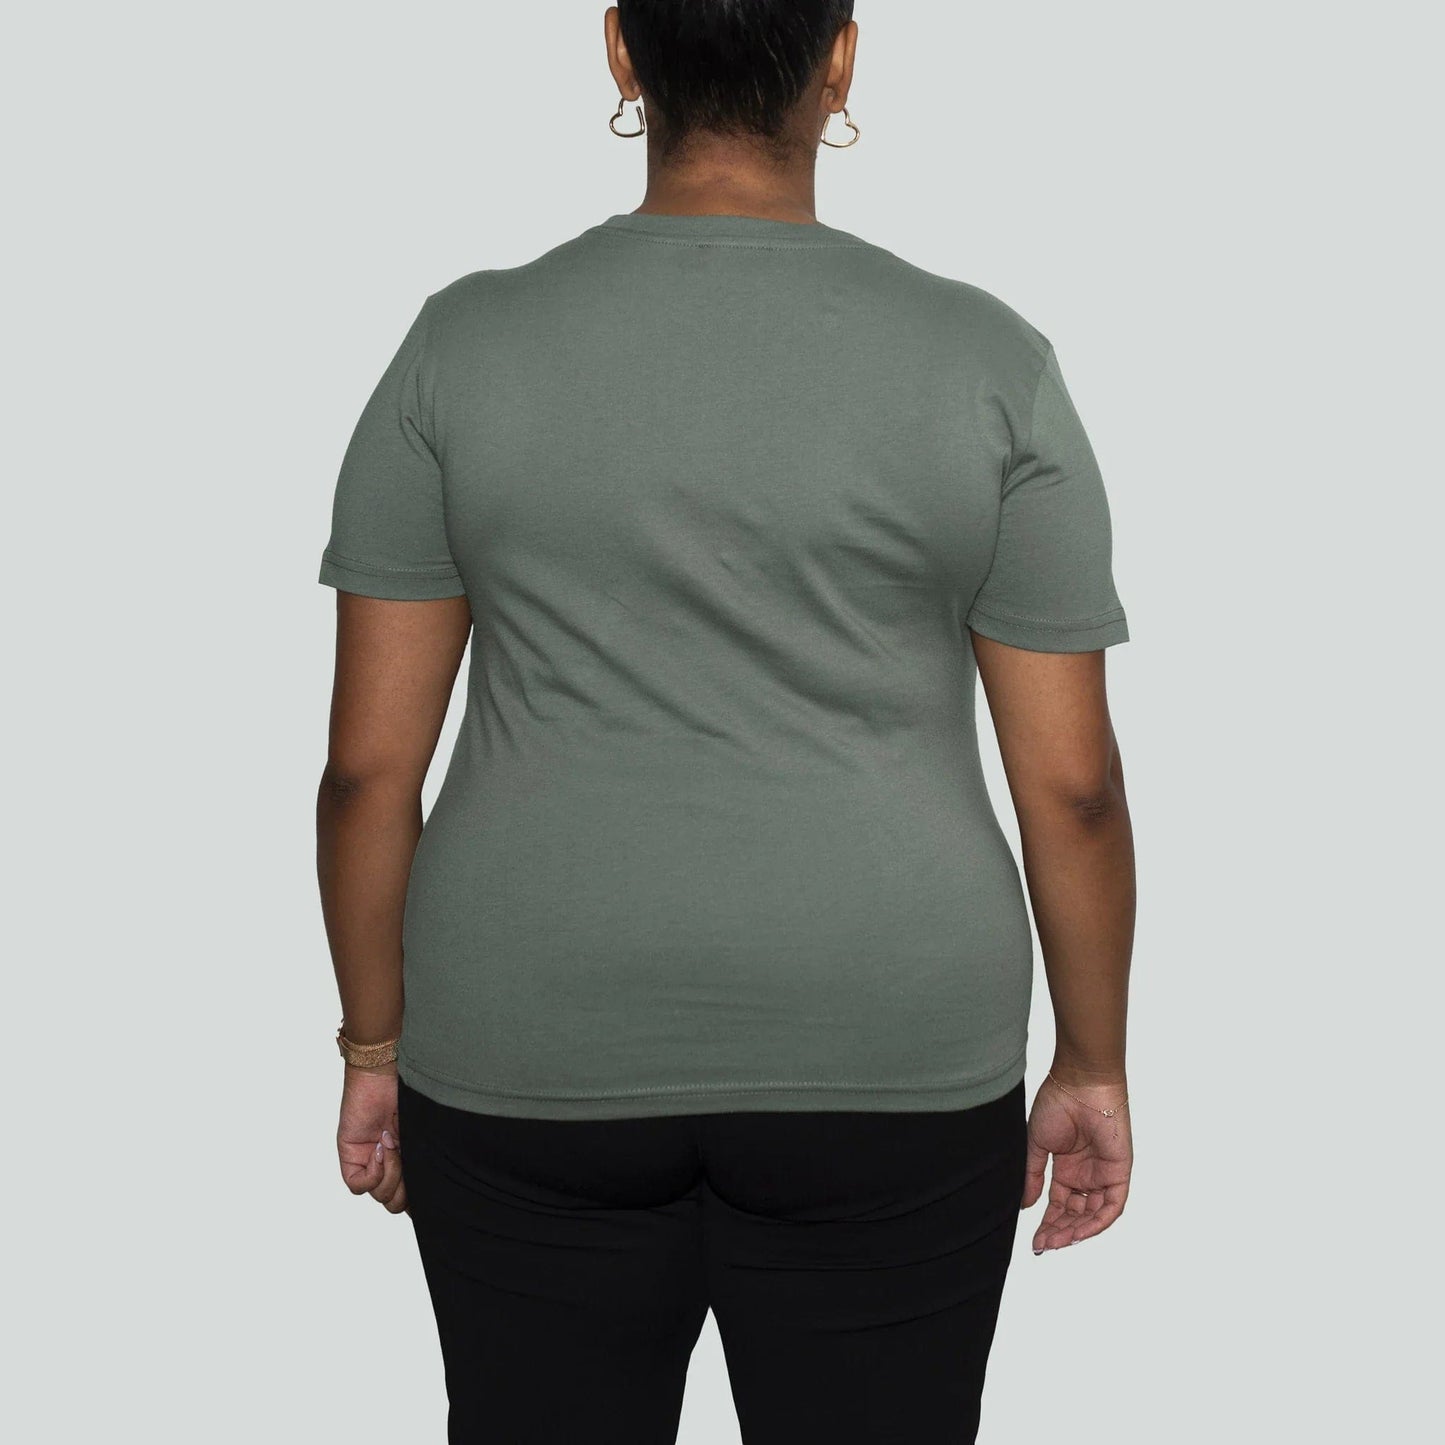 Women’s Recycled Cotton T-Shirt, Sage